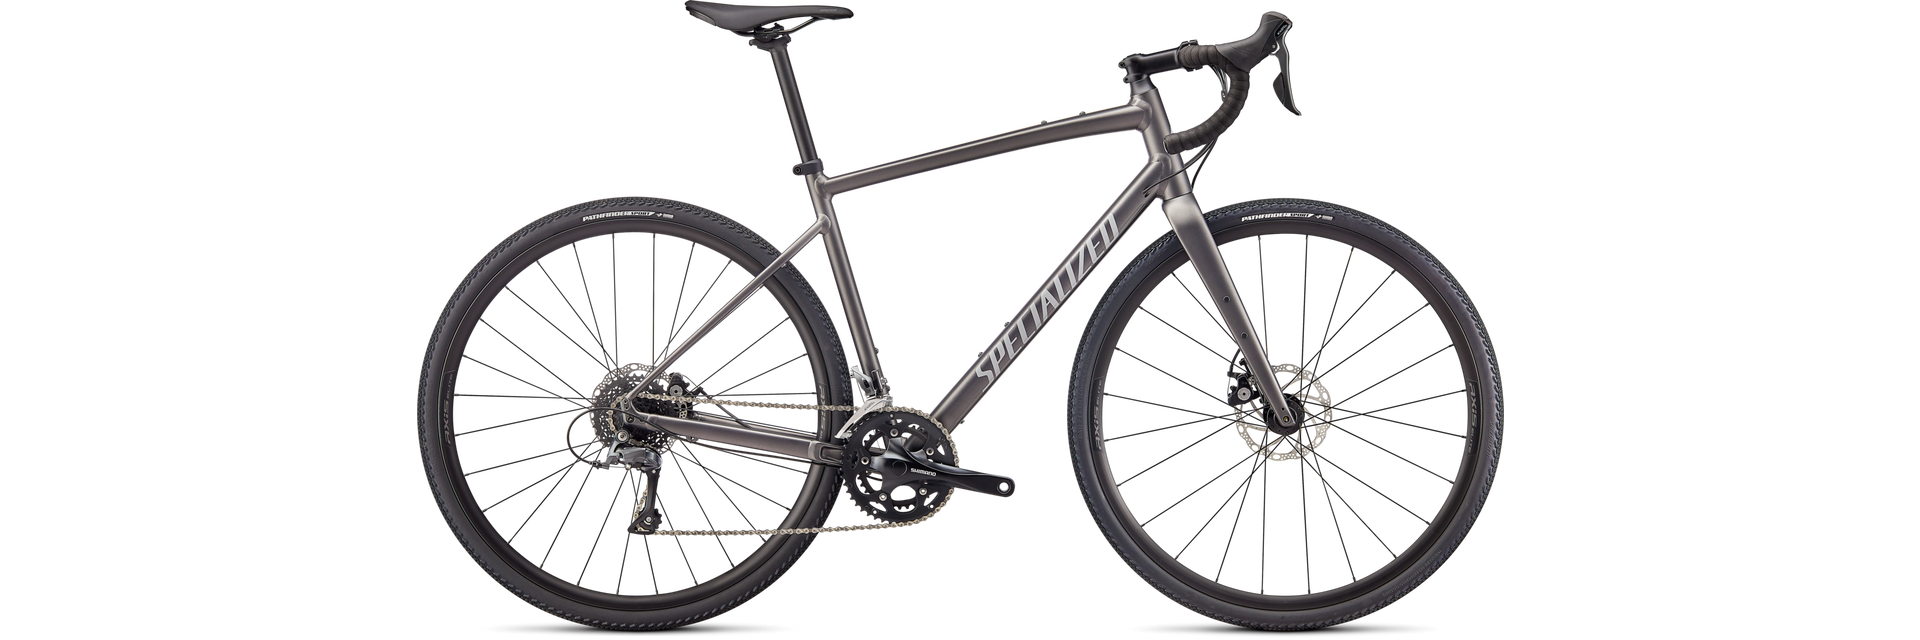 SPECIALIZED Diverge E5 Bike, 61cm Satin Smoke/Cool Grey/Chrome/Clean Smk/clgry/chrm